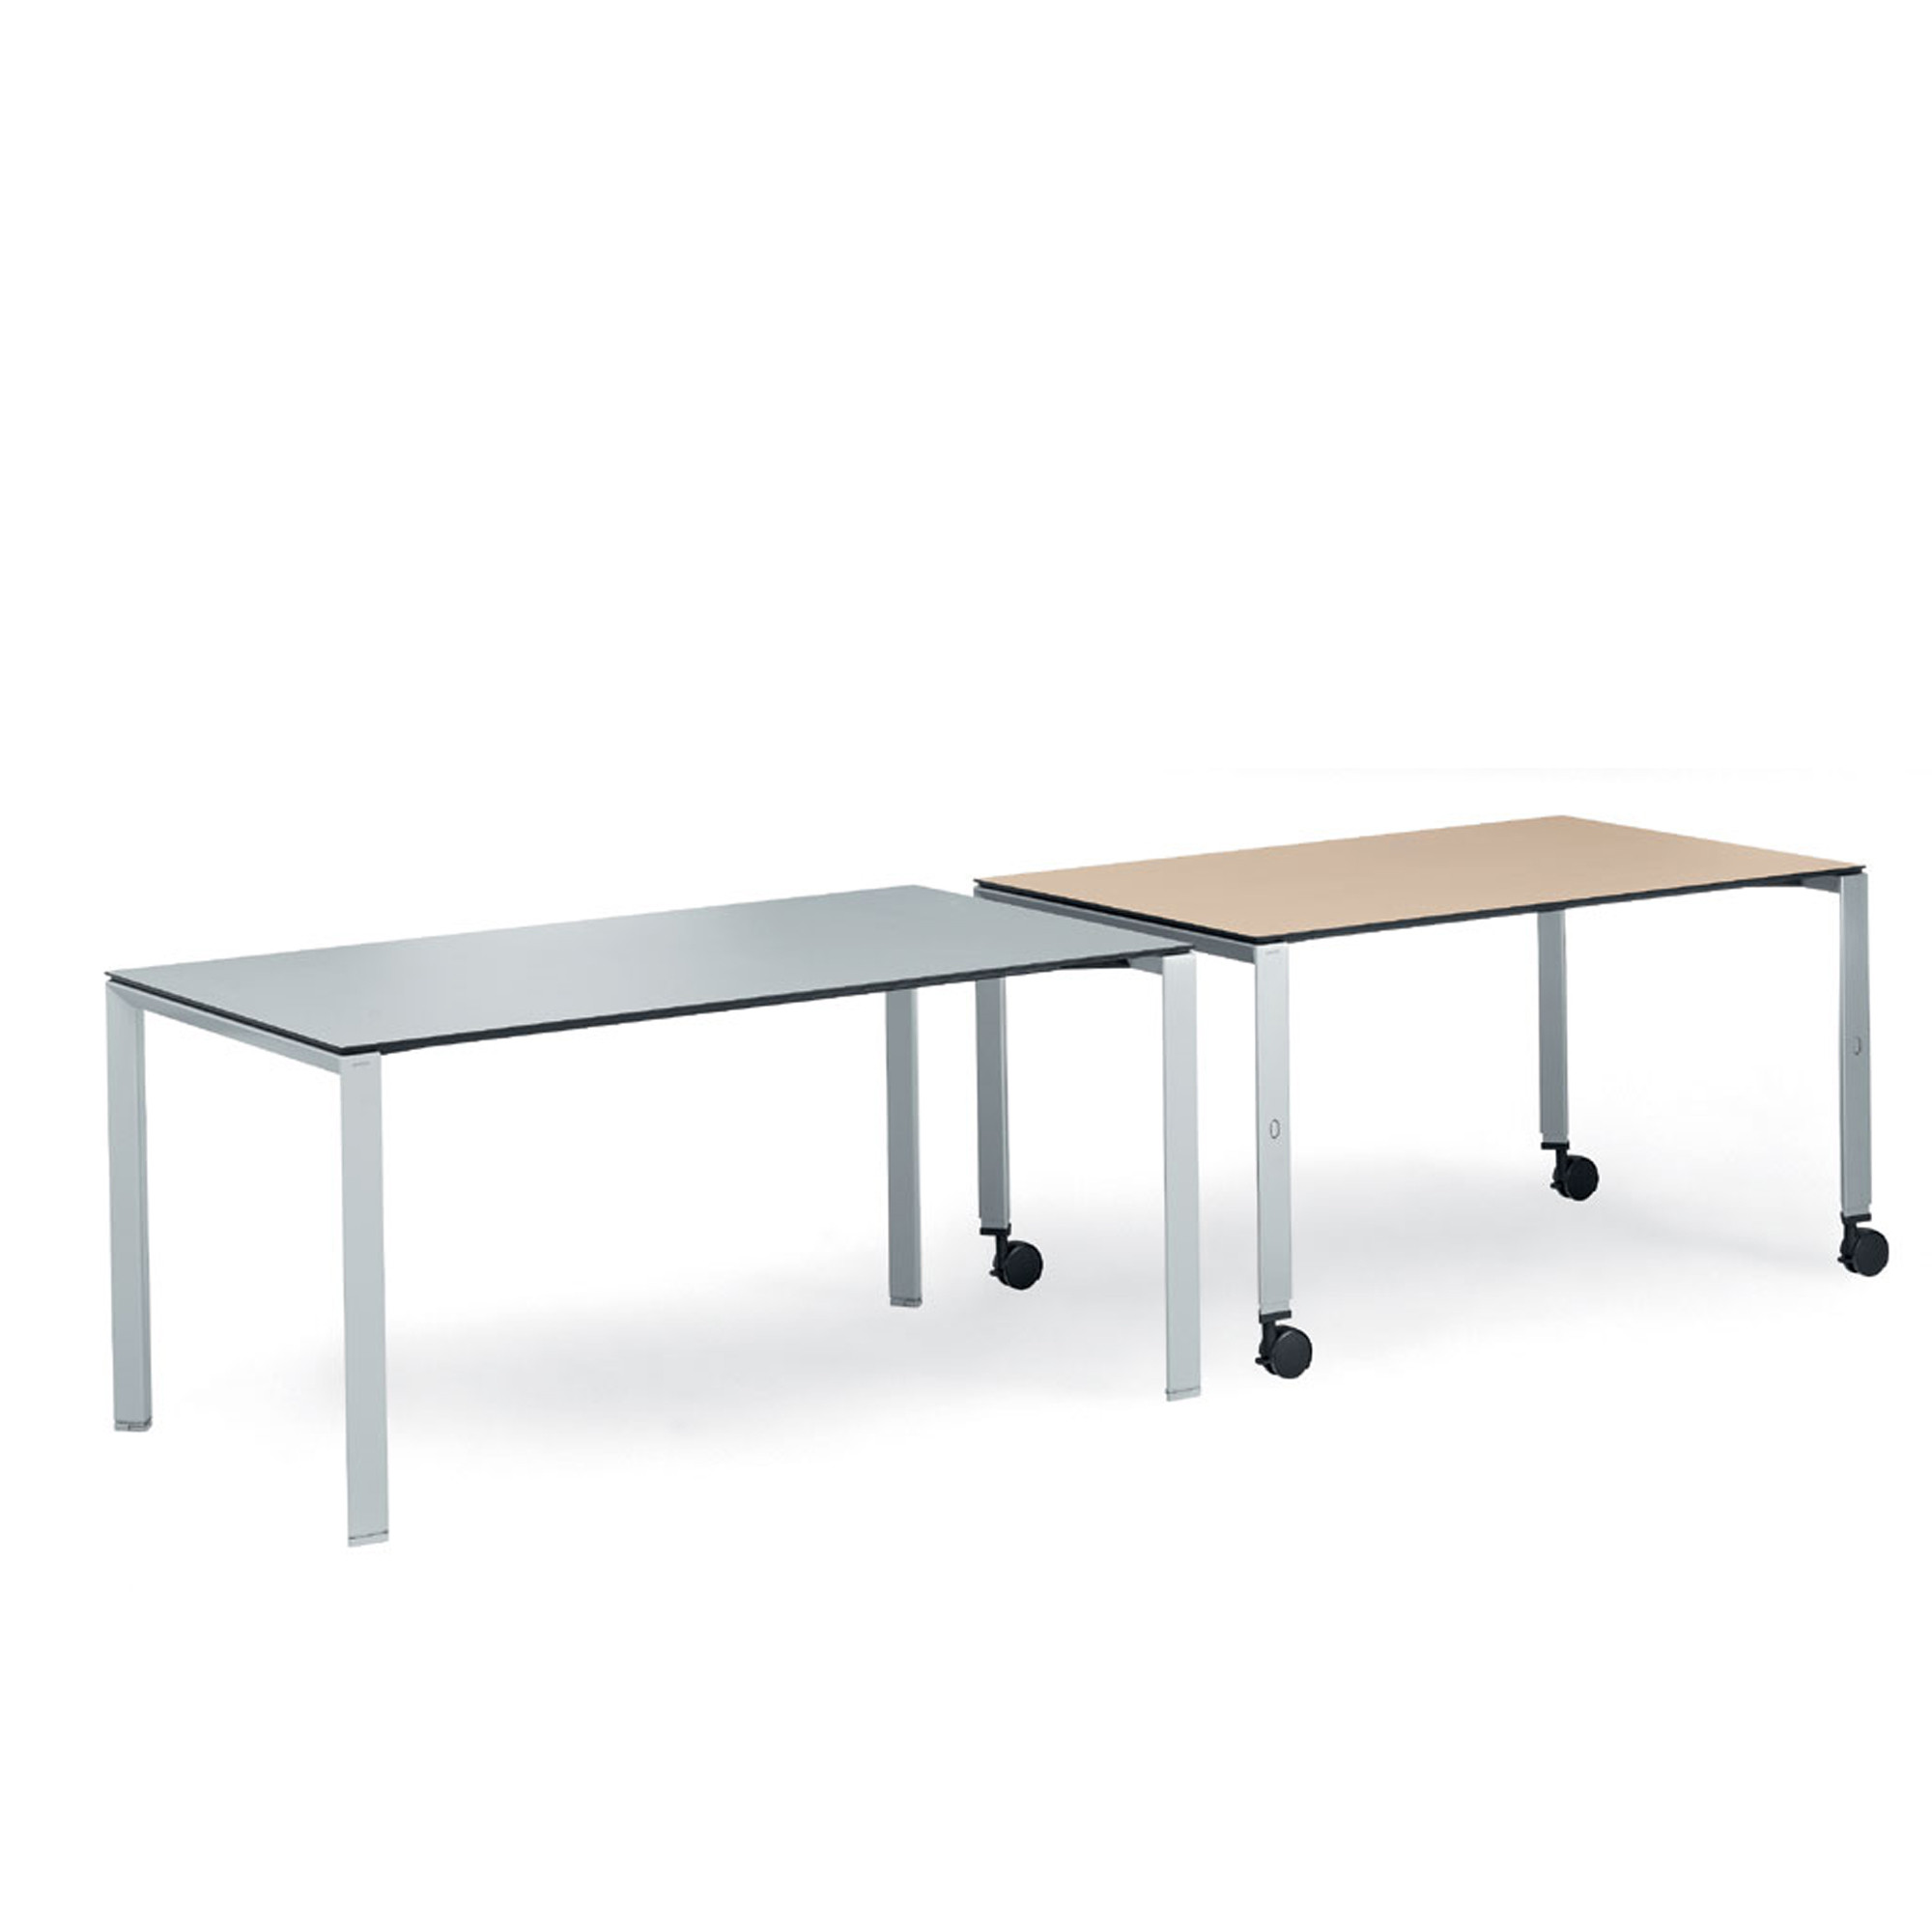 Ahrend 700 Desk with or without castors